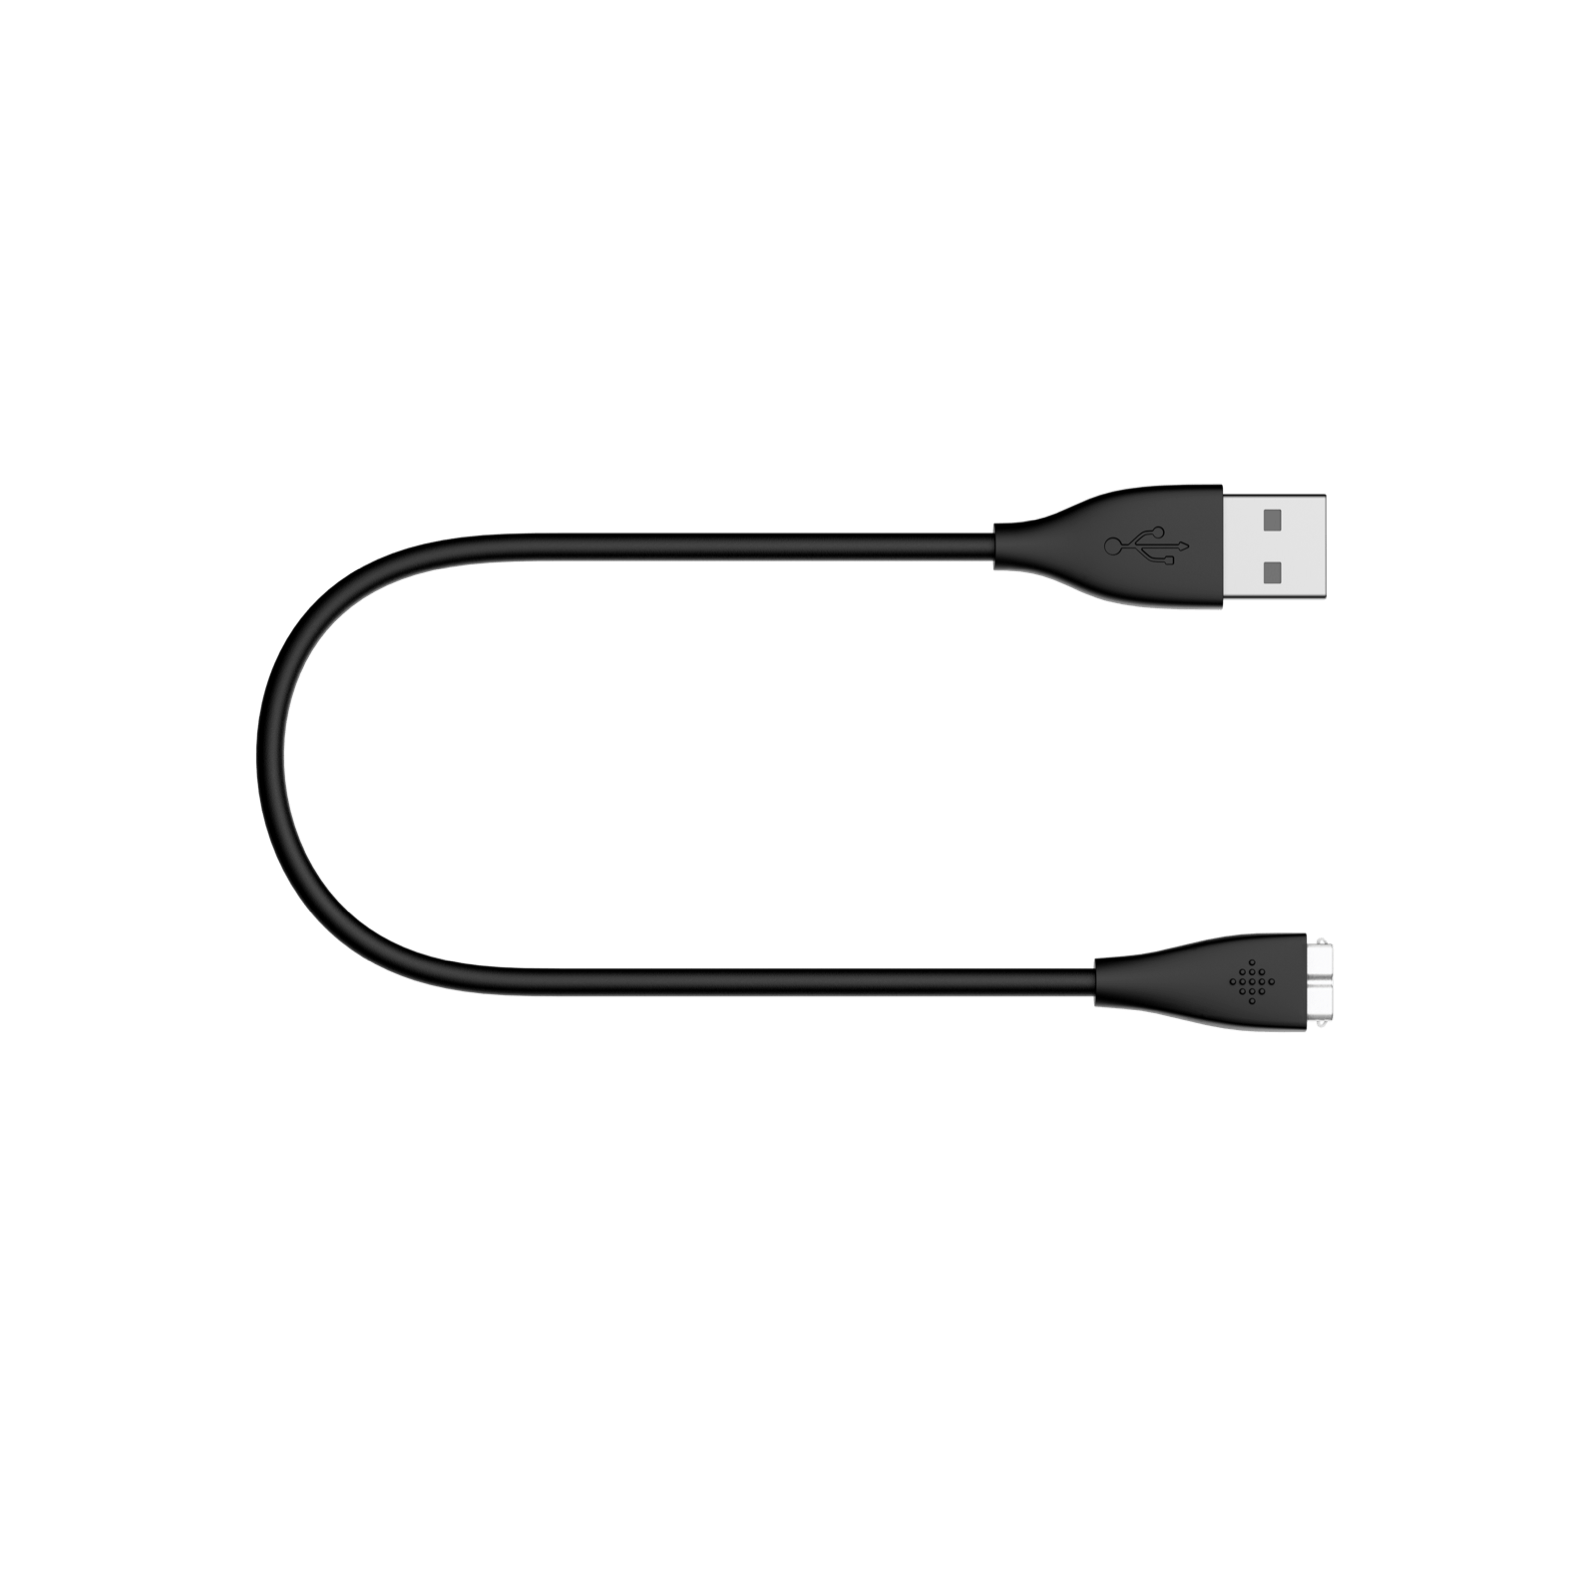 Fitbit FB156RCC Charge HR Charging Cable Accessories for sale online 